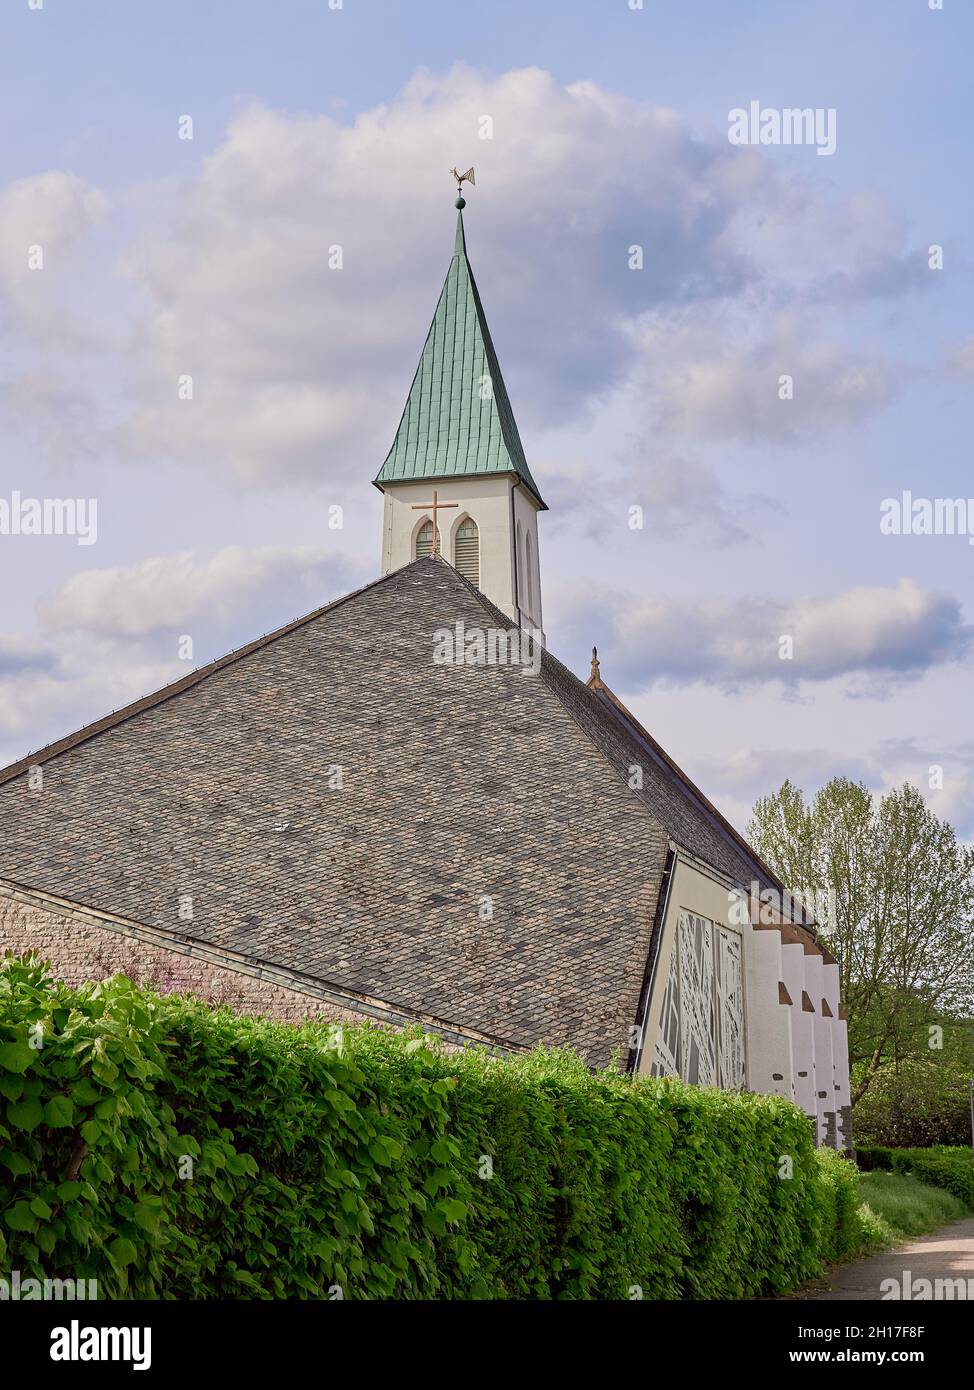 A glorious scenery of the St. Johannes Baptist church in Bielefeld, Germany Stock Photo